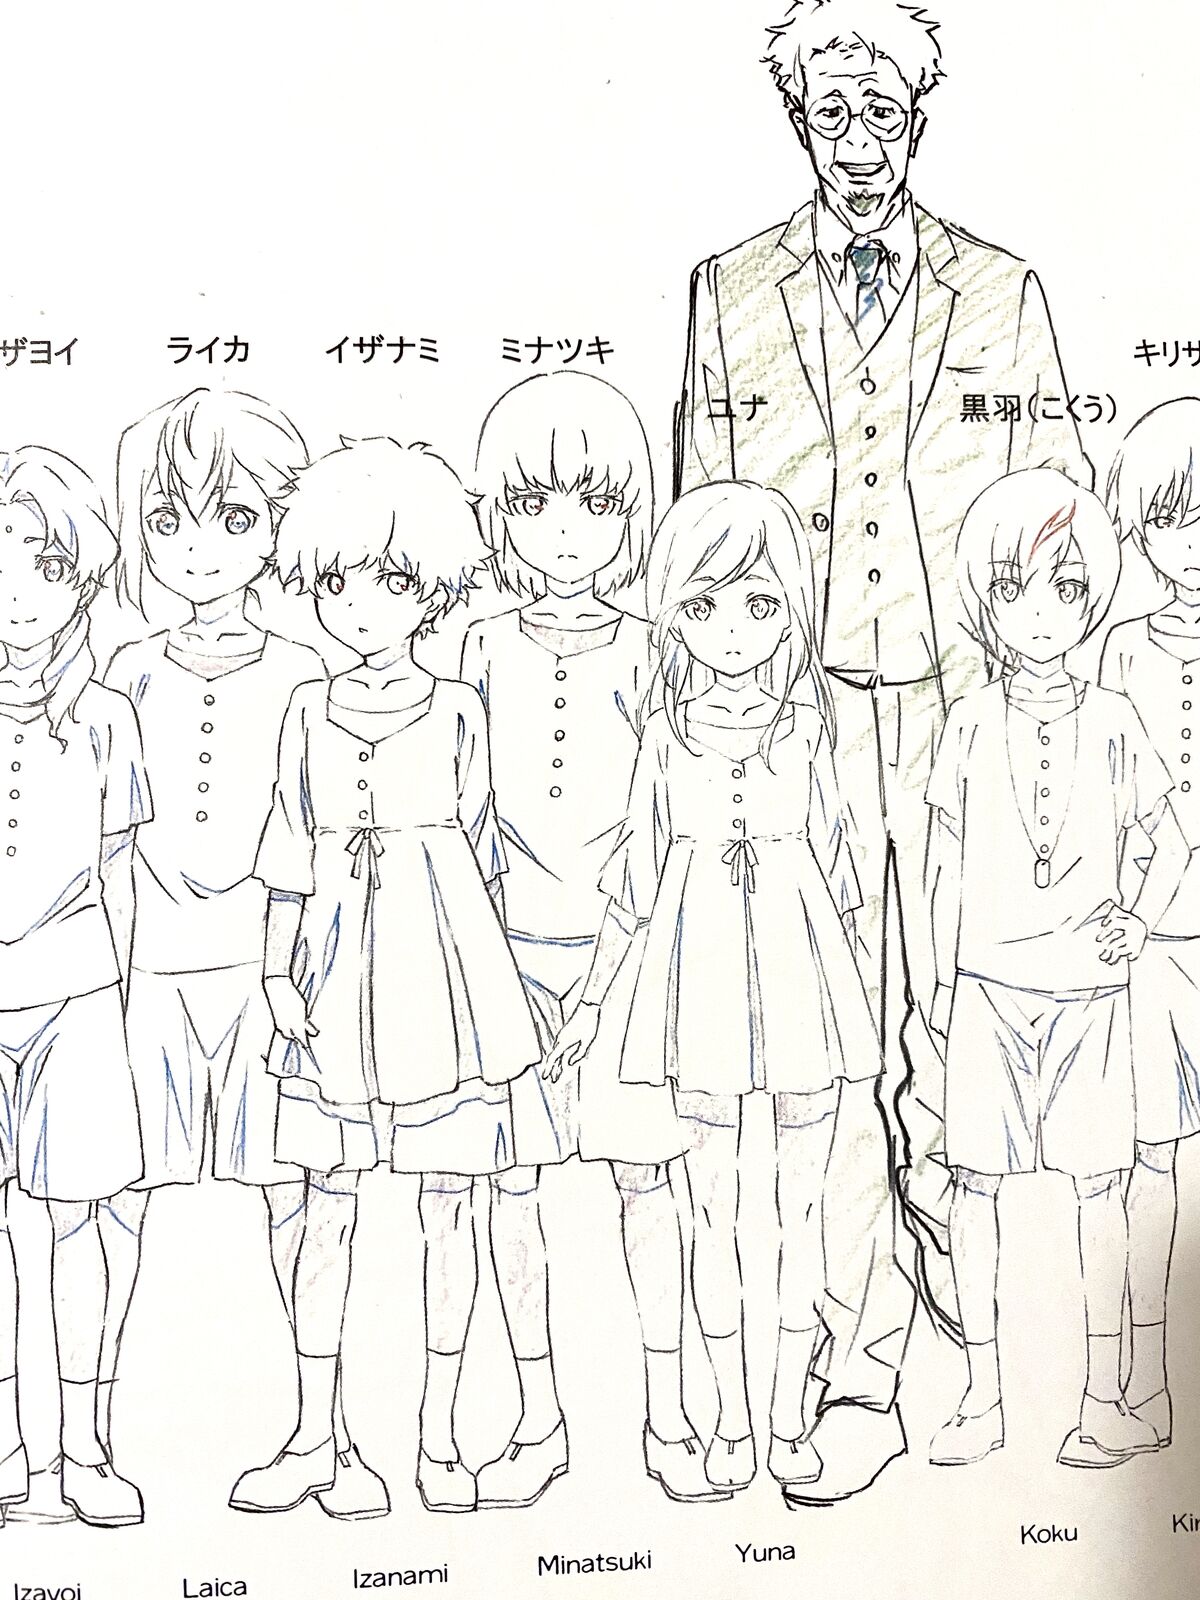 Characters appearing in B: The Beginning Succession Anime